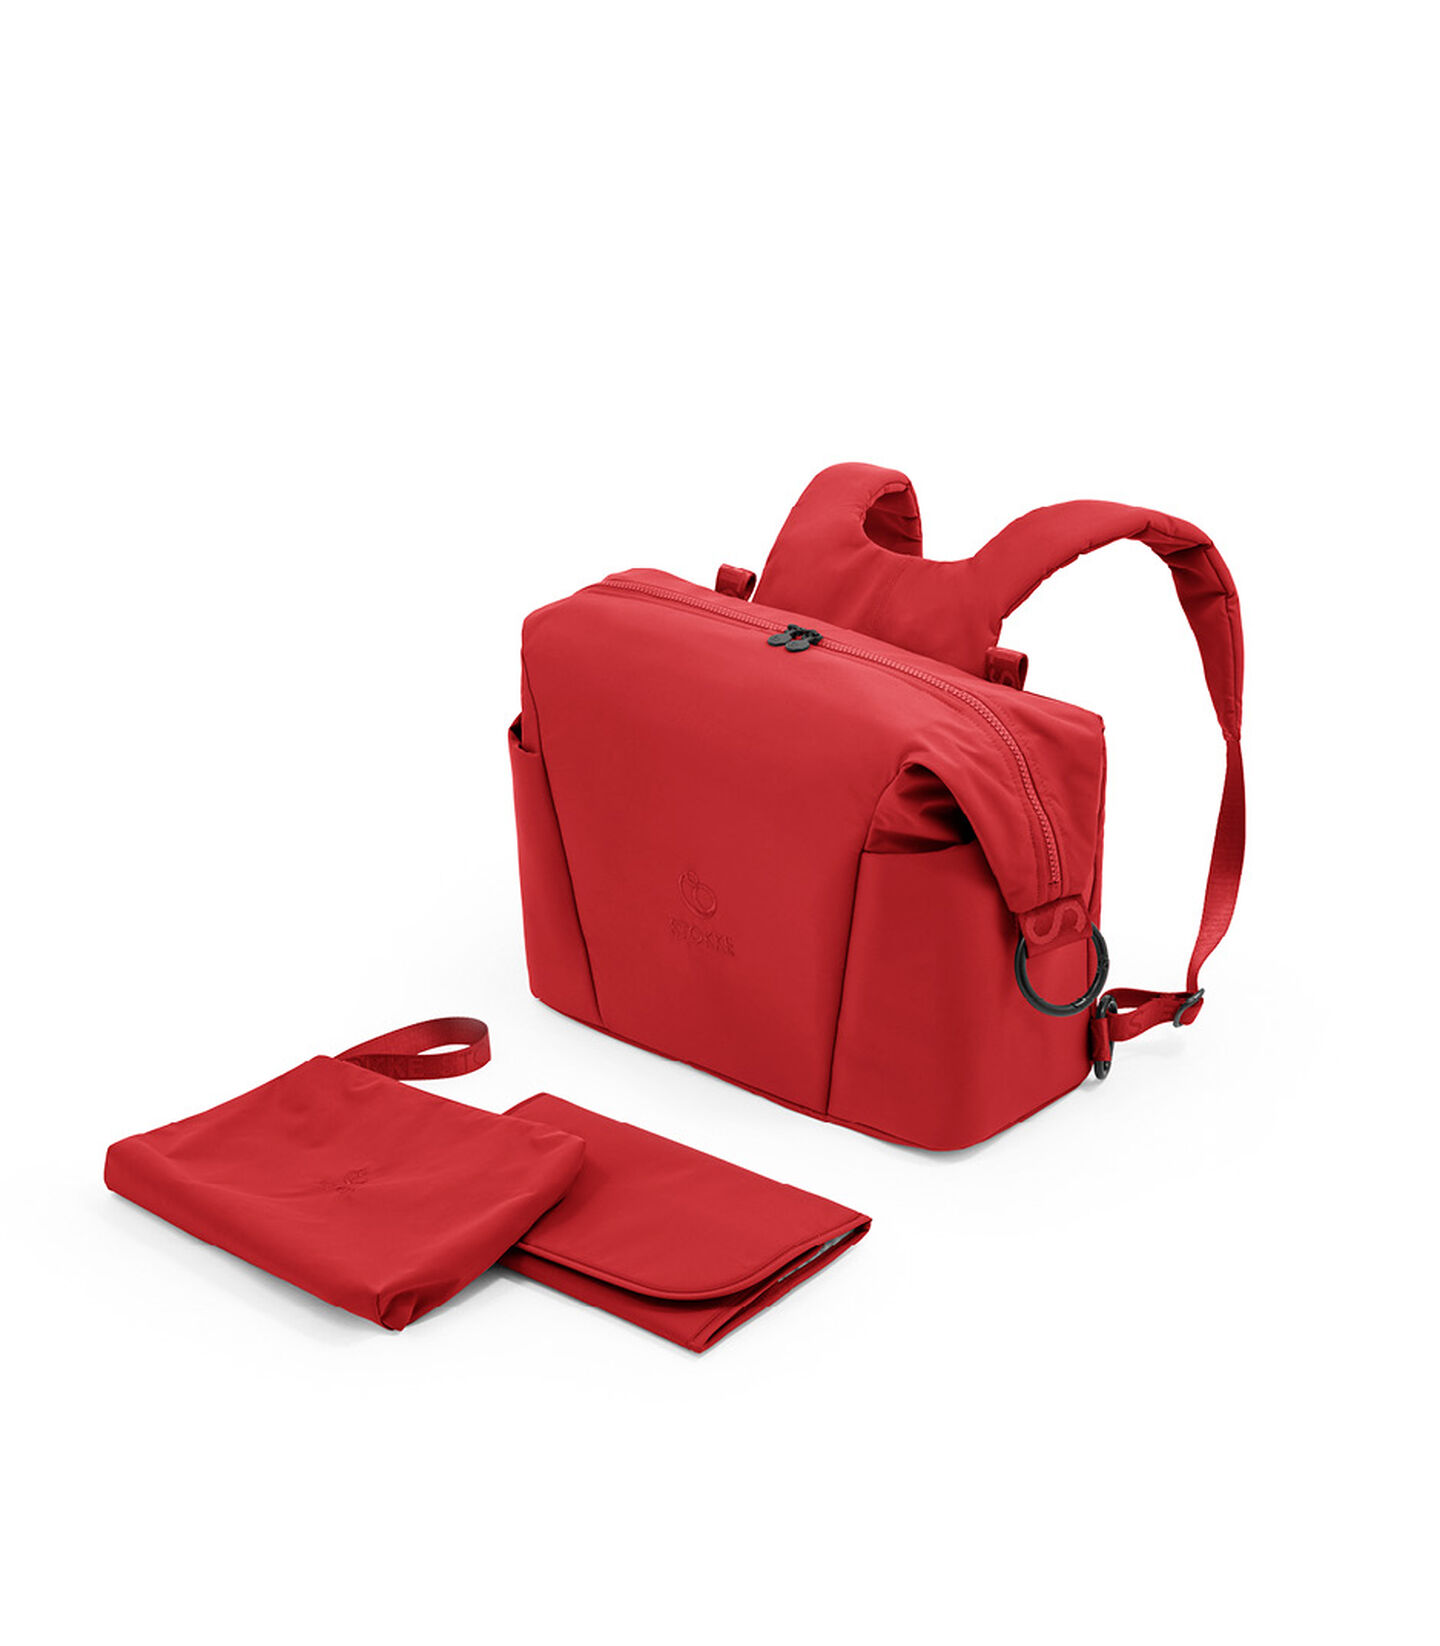 Stokke® Xplory® Pusletaske Ruby Red, Ruby Red, mainview view 3